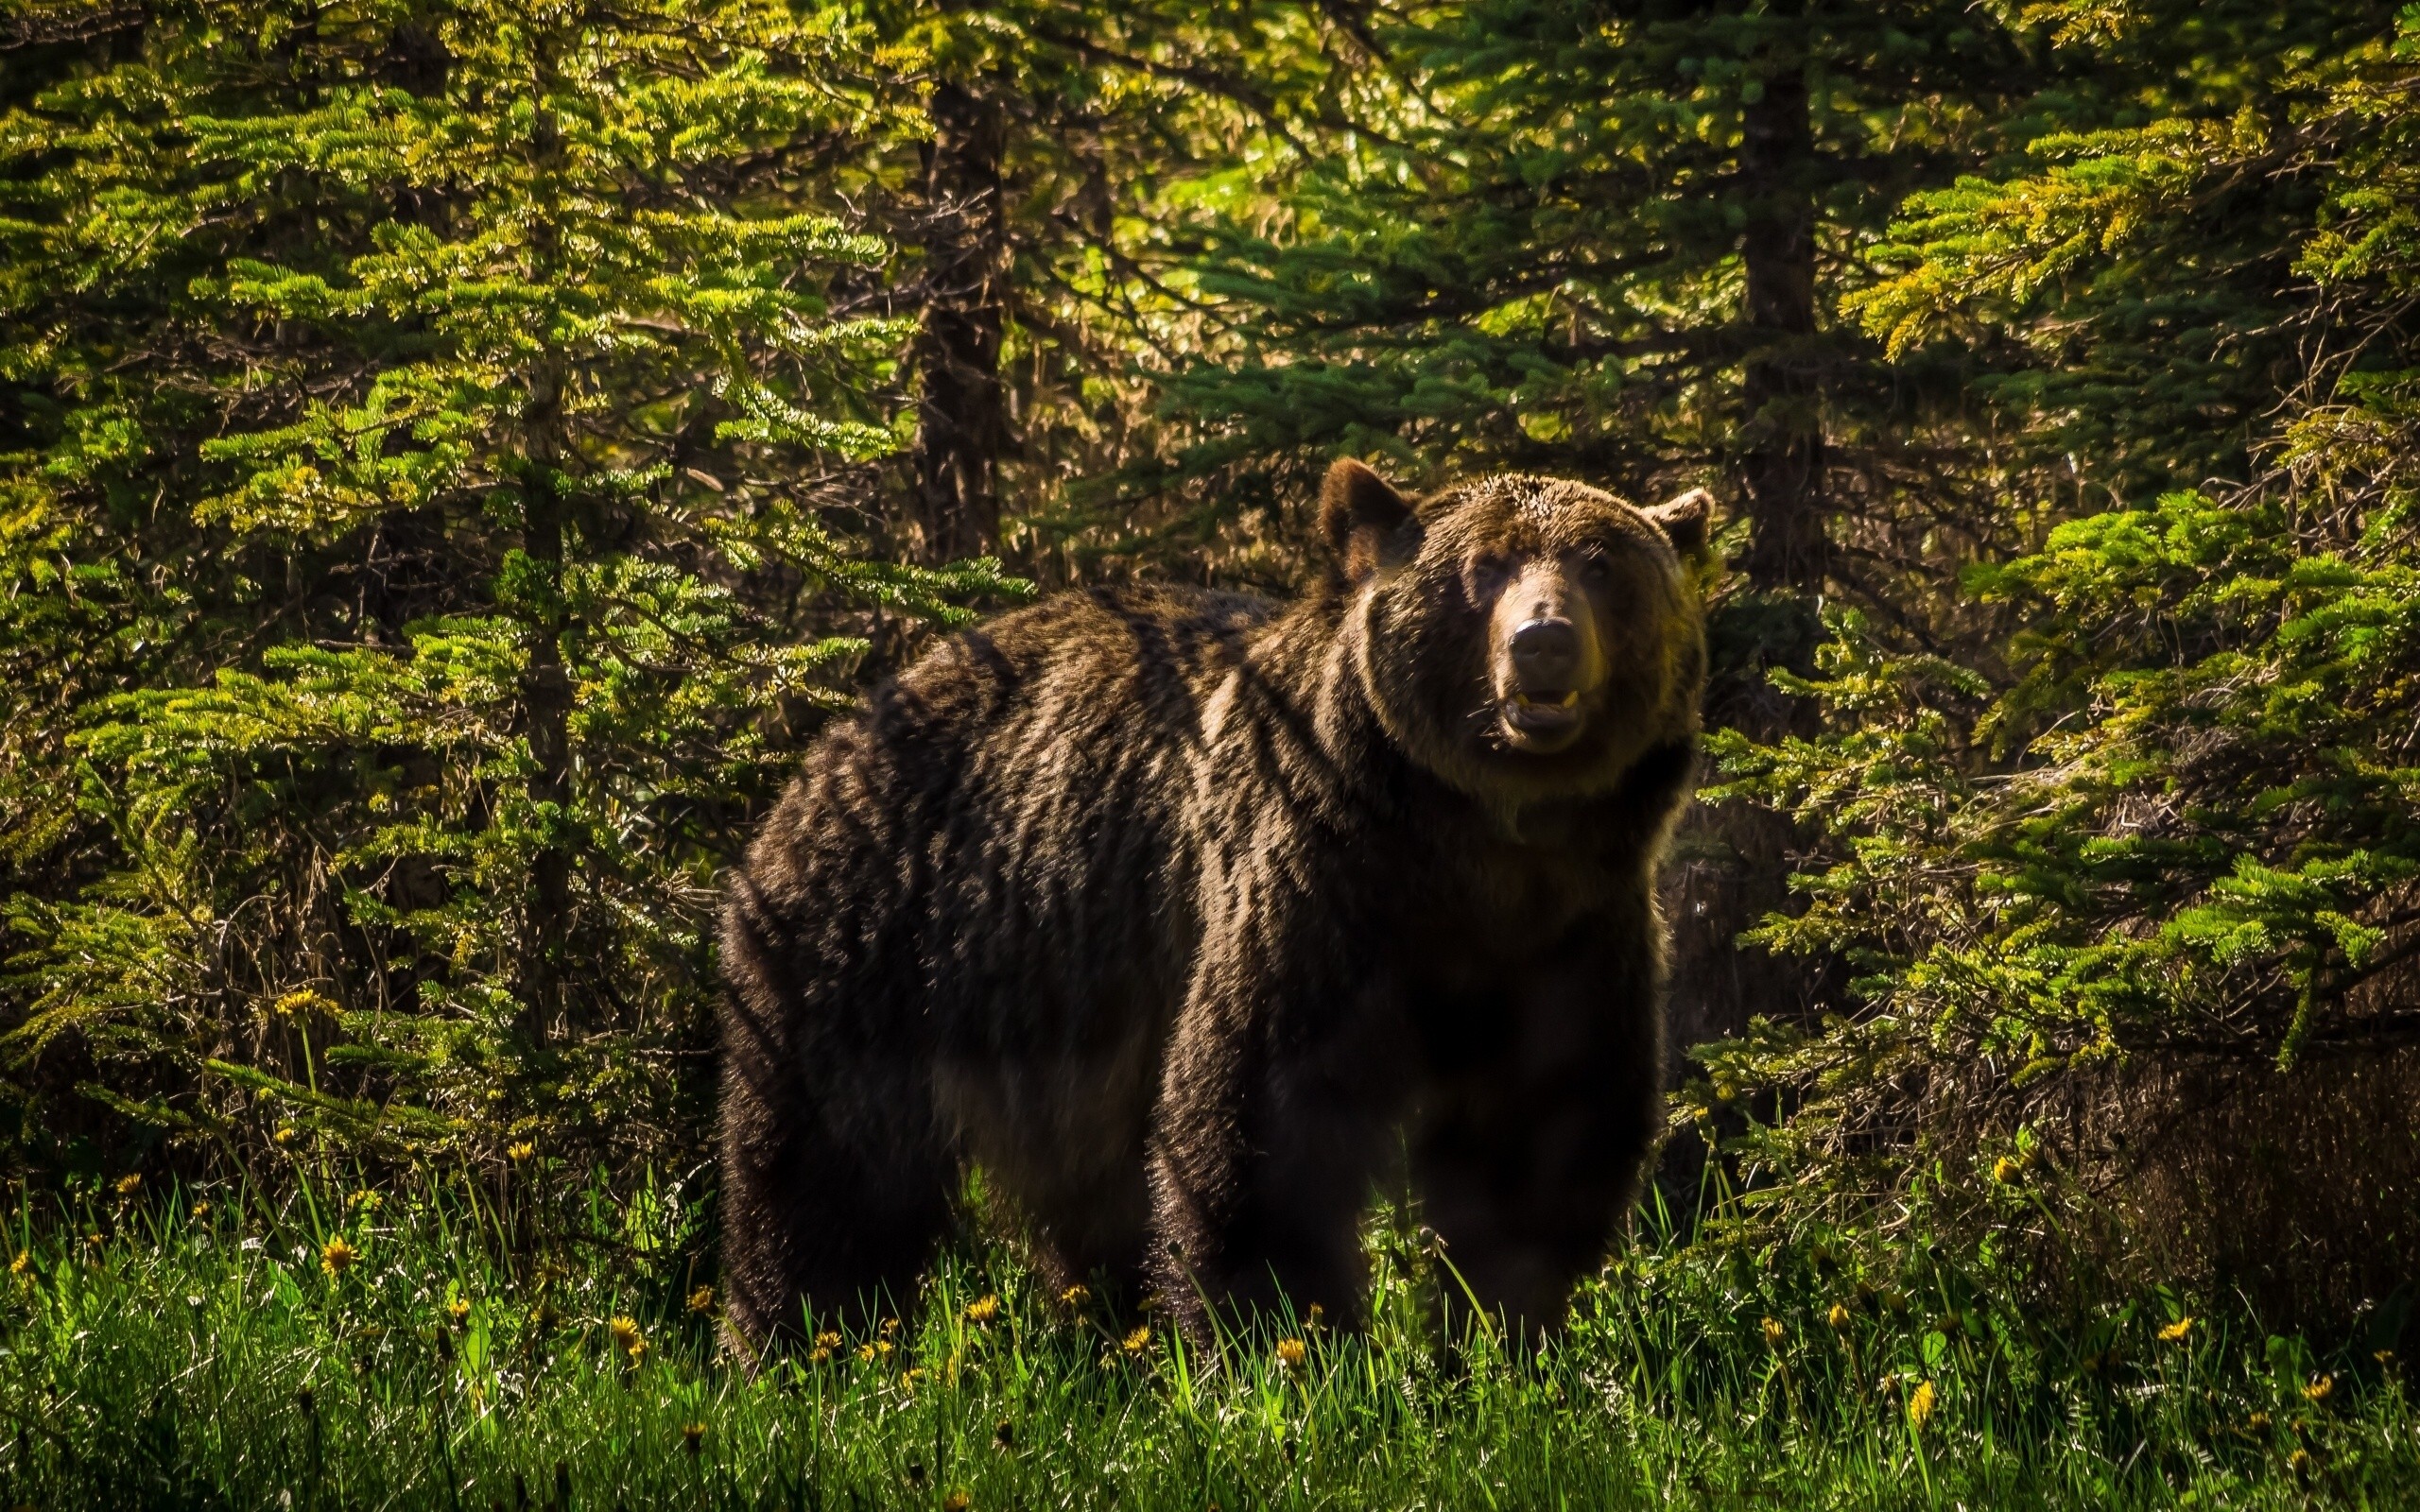 General 2560x1600 animals bears forest nature pine trees mammals